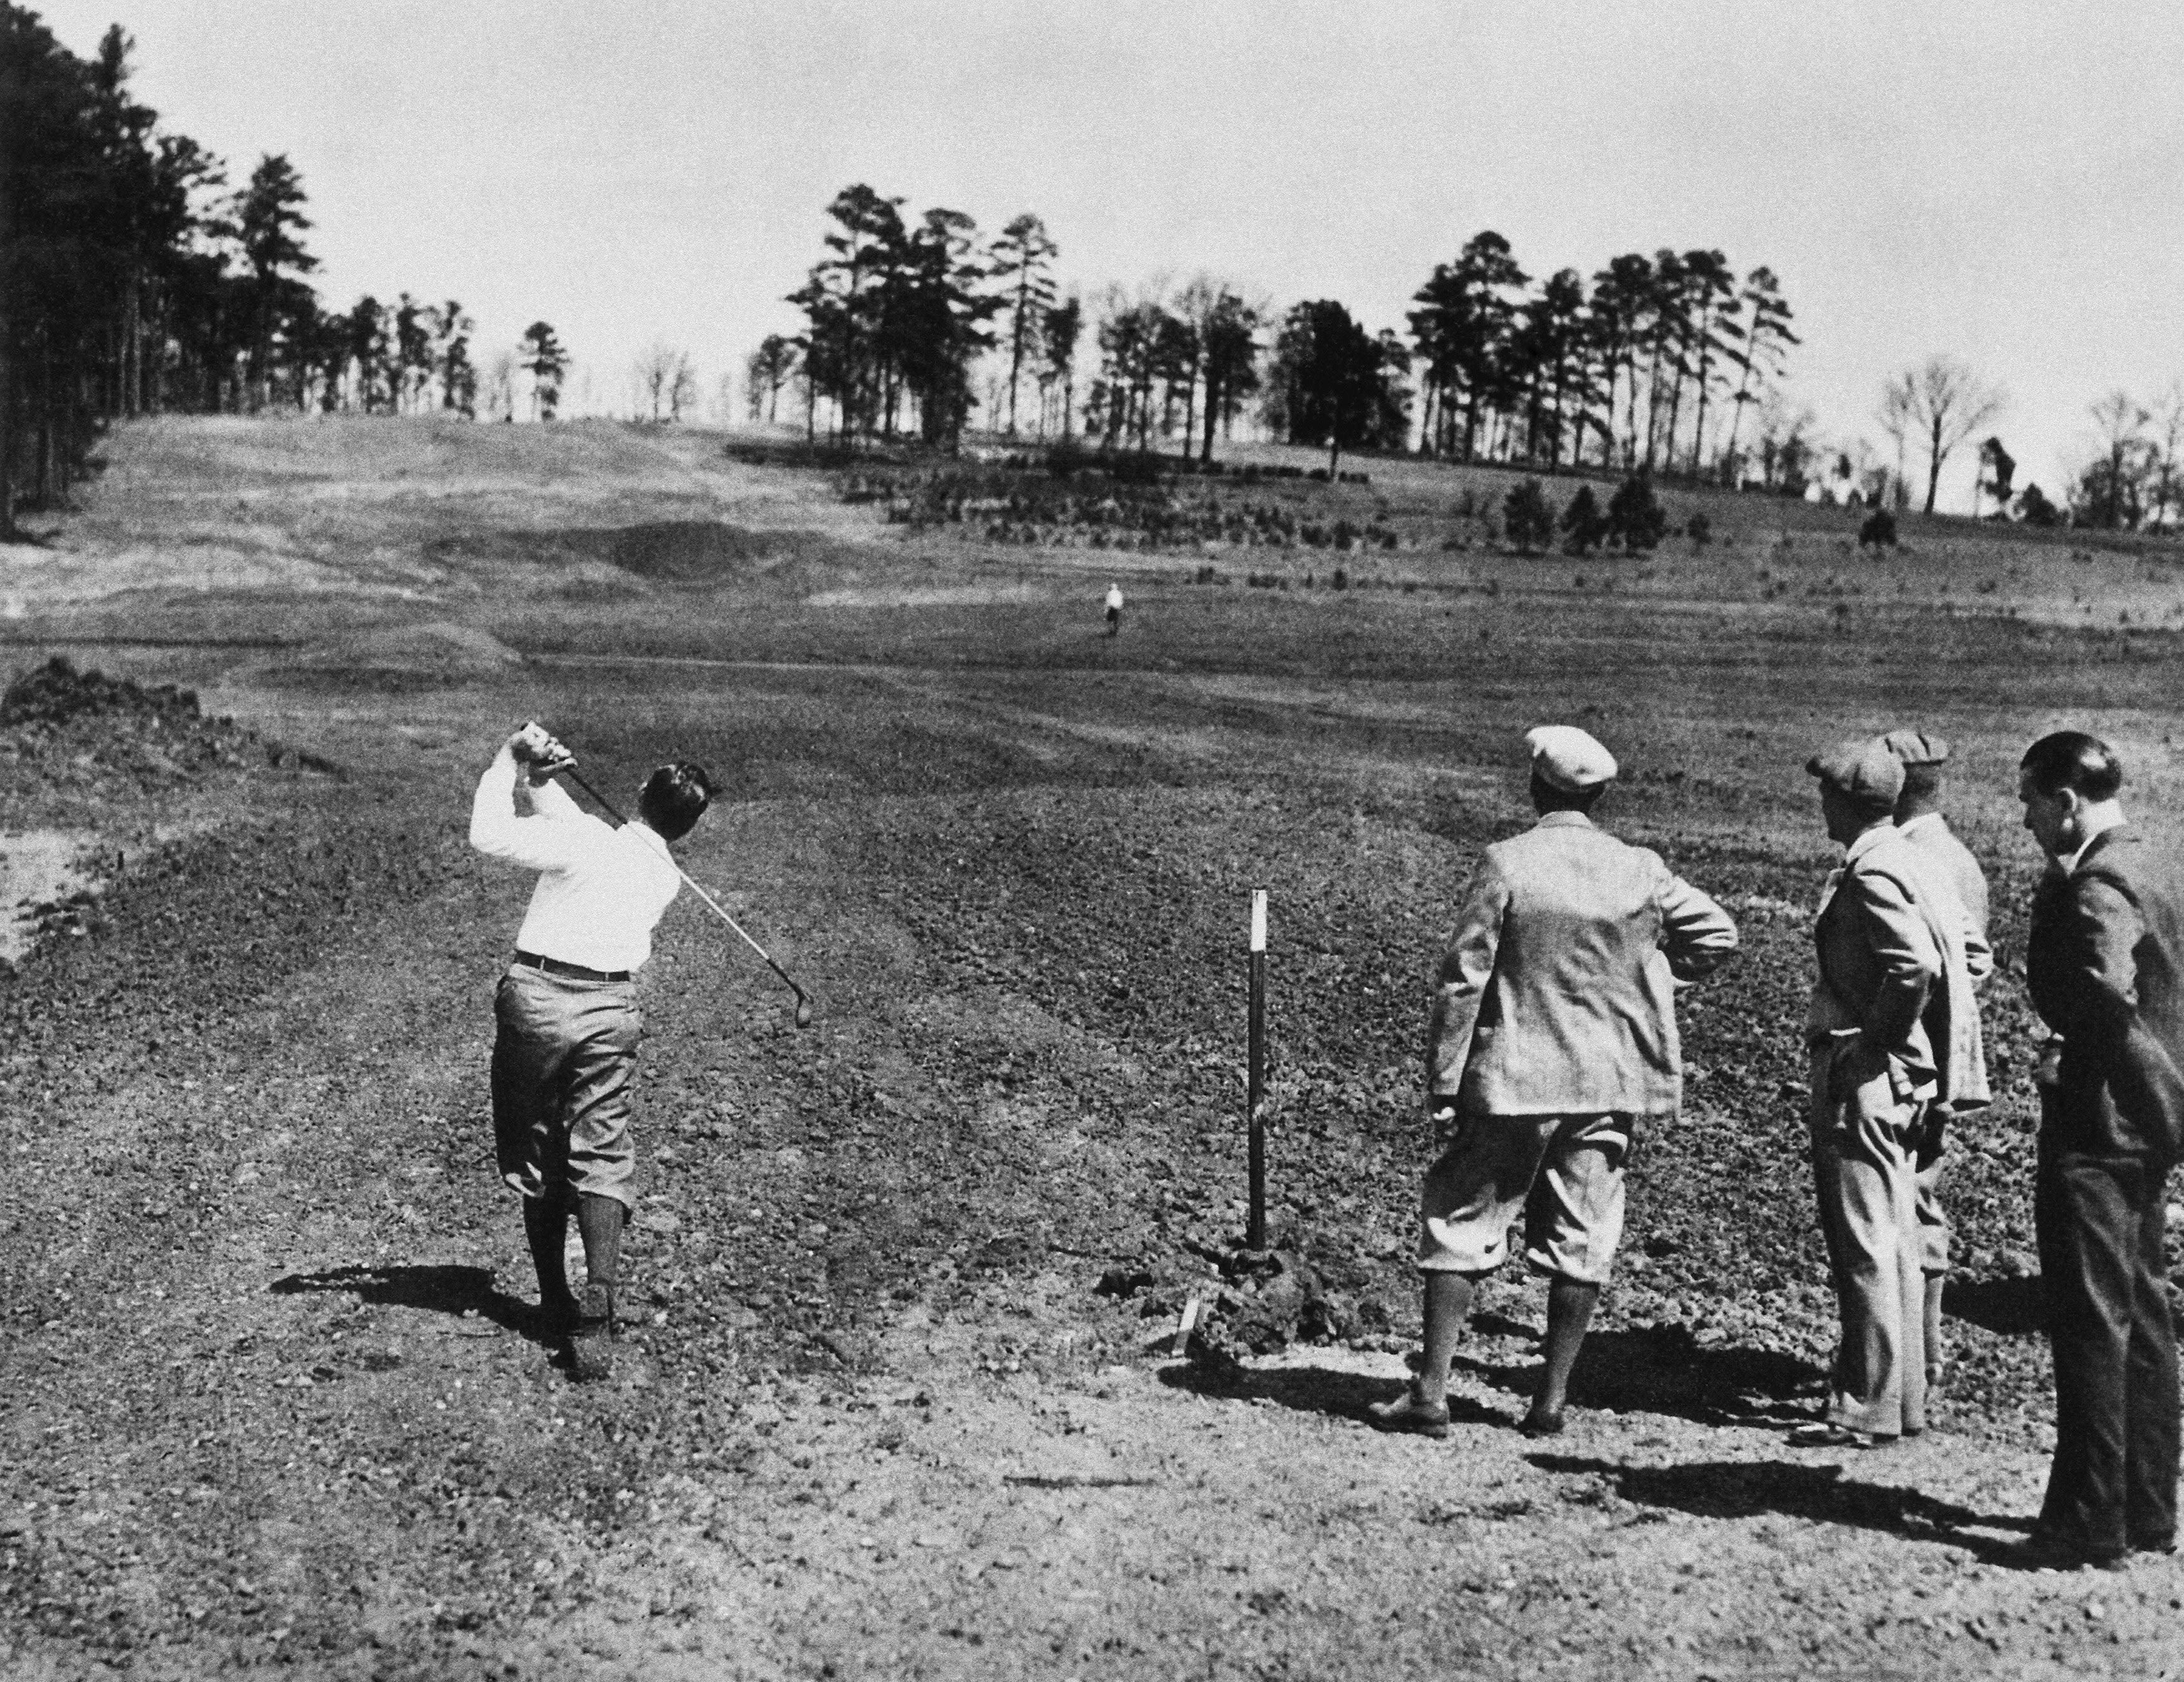 Bobby Jones plays a shot on Augusta National's eighth hole while the course in under construction in 1932, with his father, Bob Jones, Sr. (Colonel), Clifford Roberts, and Alister MacKenzie watching. (Photo by Augusta National/Getty Images)